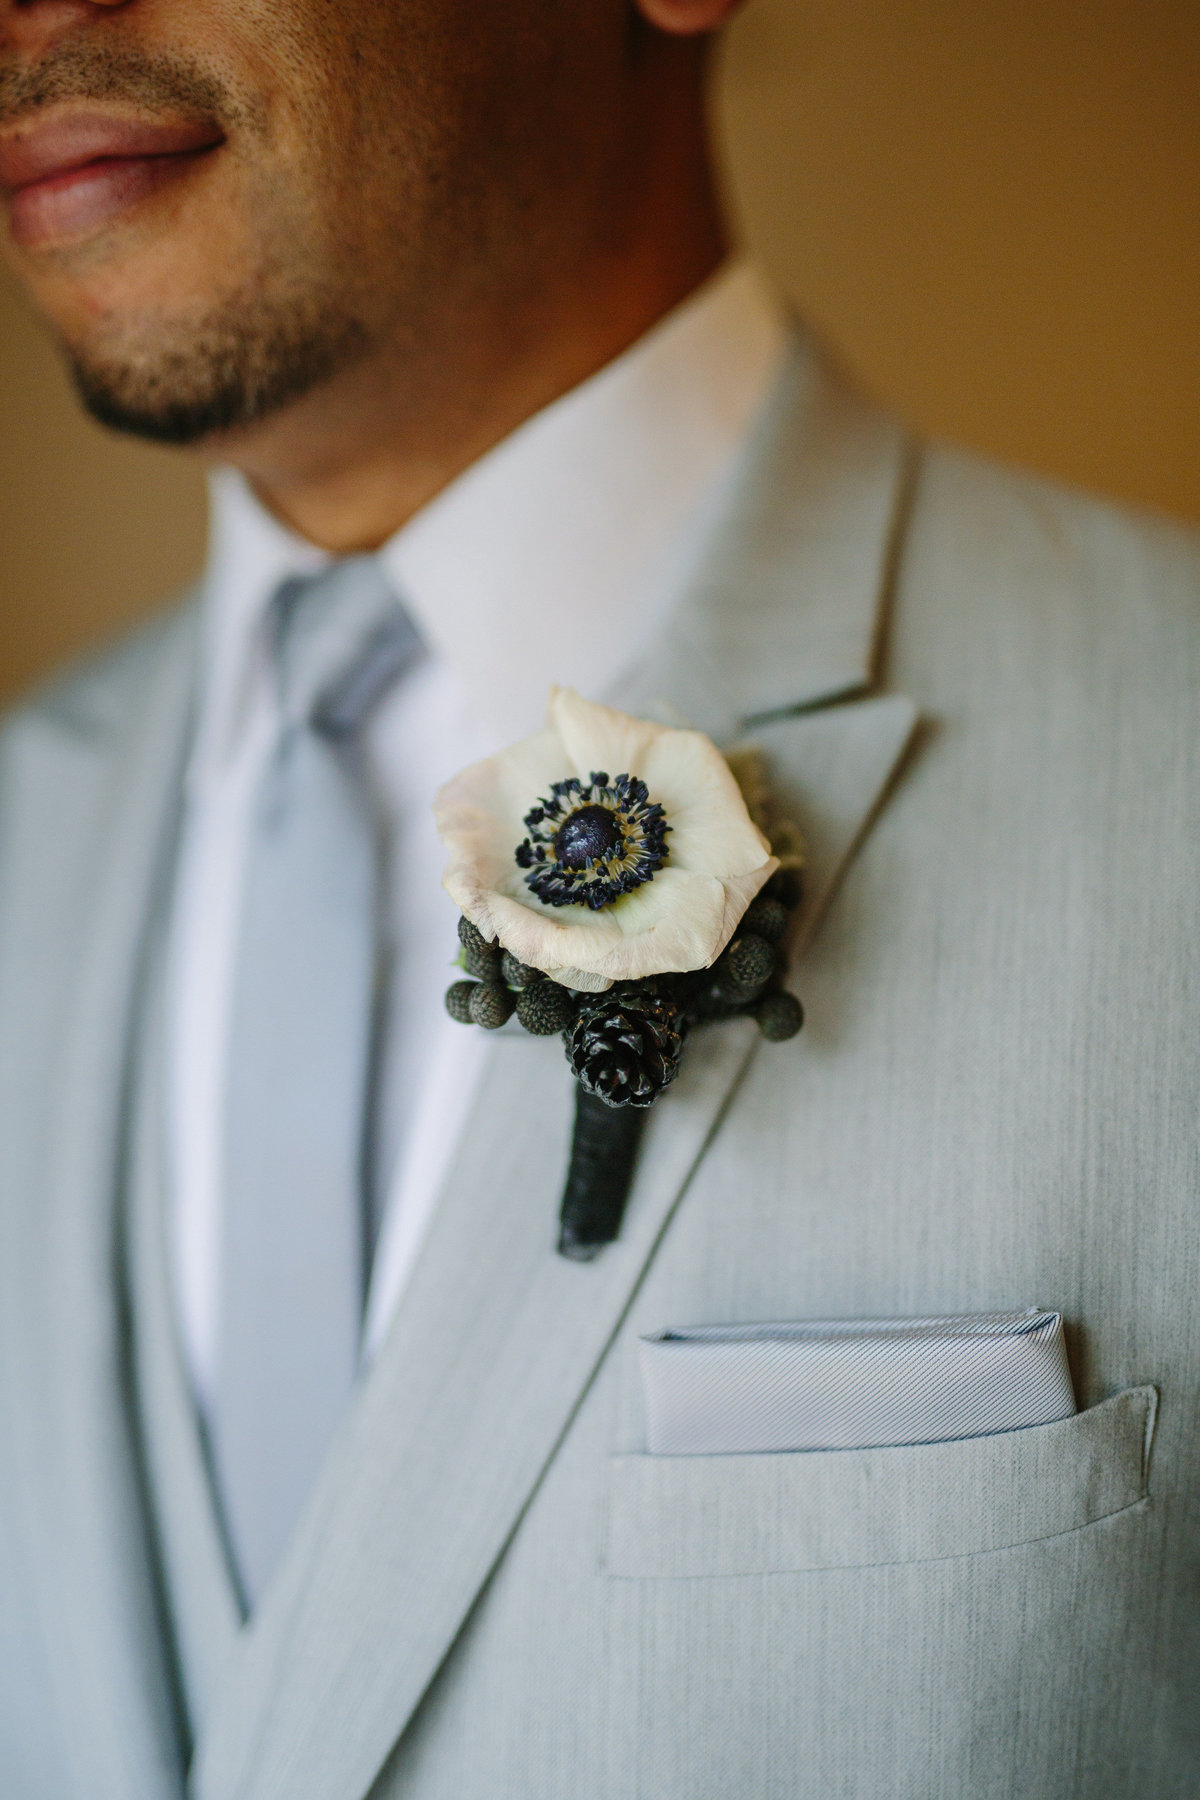 Groom floral detail boutonniere white anemone on suit lapel before wedding ceremony at The Gardens at West Green San Antonio